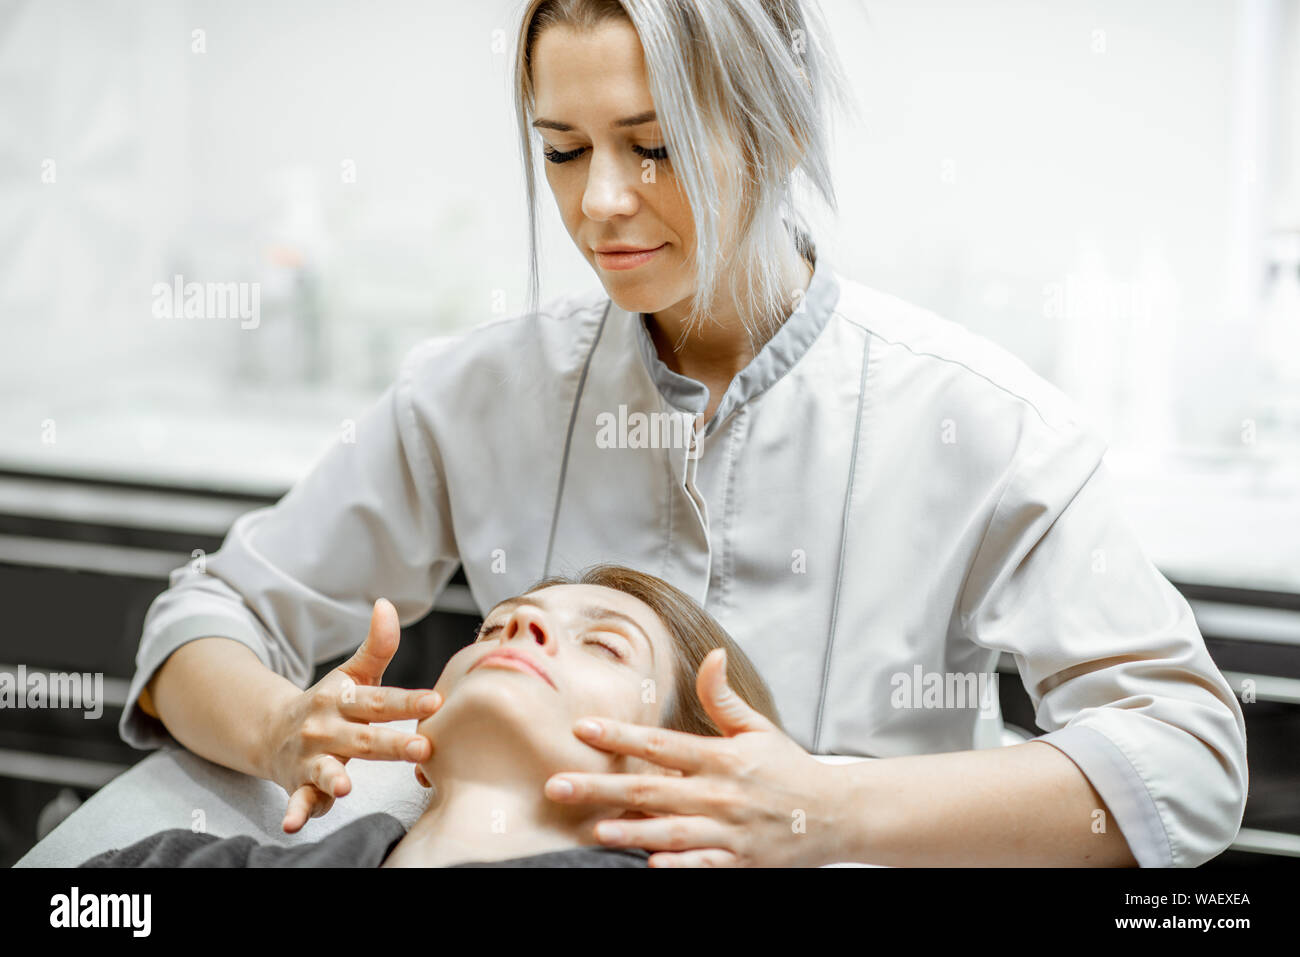 Cosmetologist Making Facial Massage To A Beautiful Woman At The Beauty Salon Concept Of A Lymph